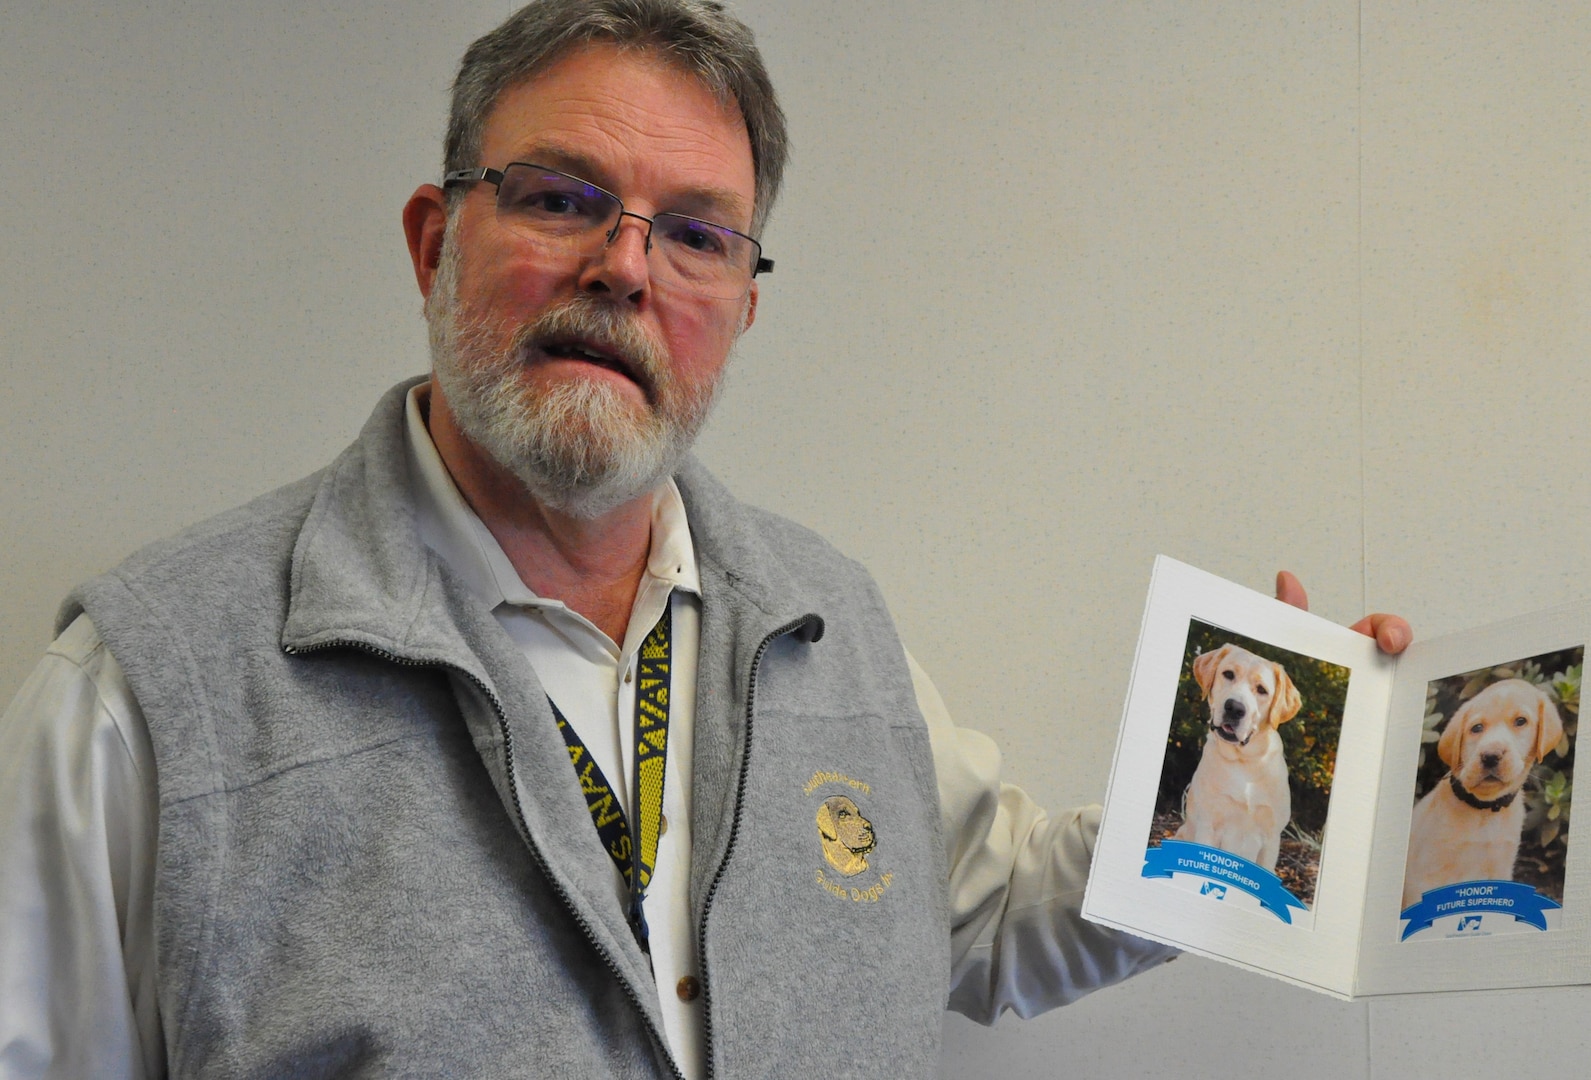 IMAGE: DAHLGREN, Va. (Dec. 11, 2019) – Retired Chief Warrant Officer Ed Hudson shows his photographs of Honor, a dog he named after the Navy core value, and raises through Southeastern Guide Dogs’ tele-raiser program. The Cyber Technologies and Software Systems Division head at Naval Surface Warfare Center Dahlgren Division highlighted his journey with raising guide dogs during a Veterans Integration event, Dec. 5. Hudson has volunteered for Southeastern Guide Dogs, a nonprofit in Florida that provides services to the visually impaired, veterans, children, and teenagers for more than a decade. The Navy veteran who served for 20 years encouraged his fellow veterans to “find something in life that makes you feel like you are not just existing.” (U.S. Navy photo/Released)